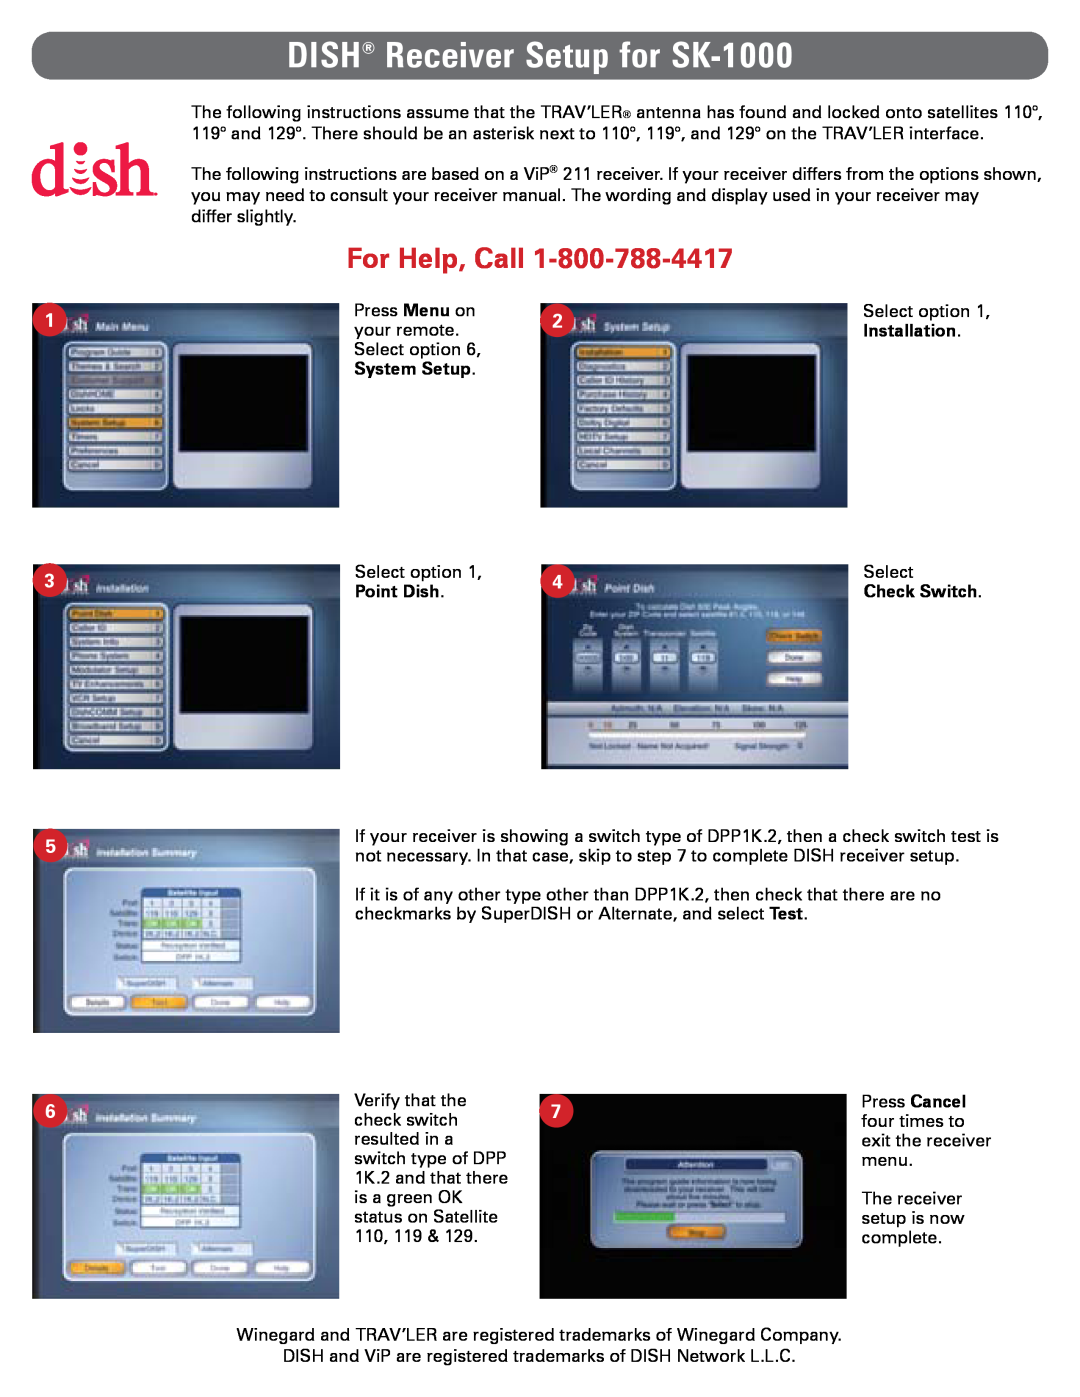 Dish Network manual DISH Receiver Setup for SK-1000, For Help, Call, Installation, System Setup, Point Dish 